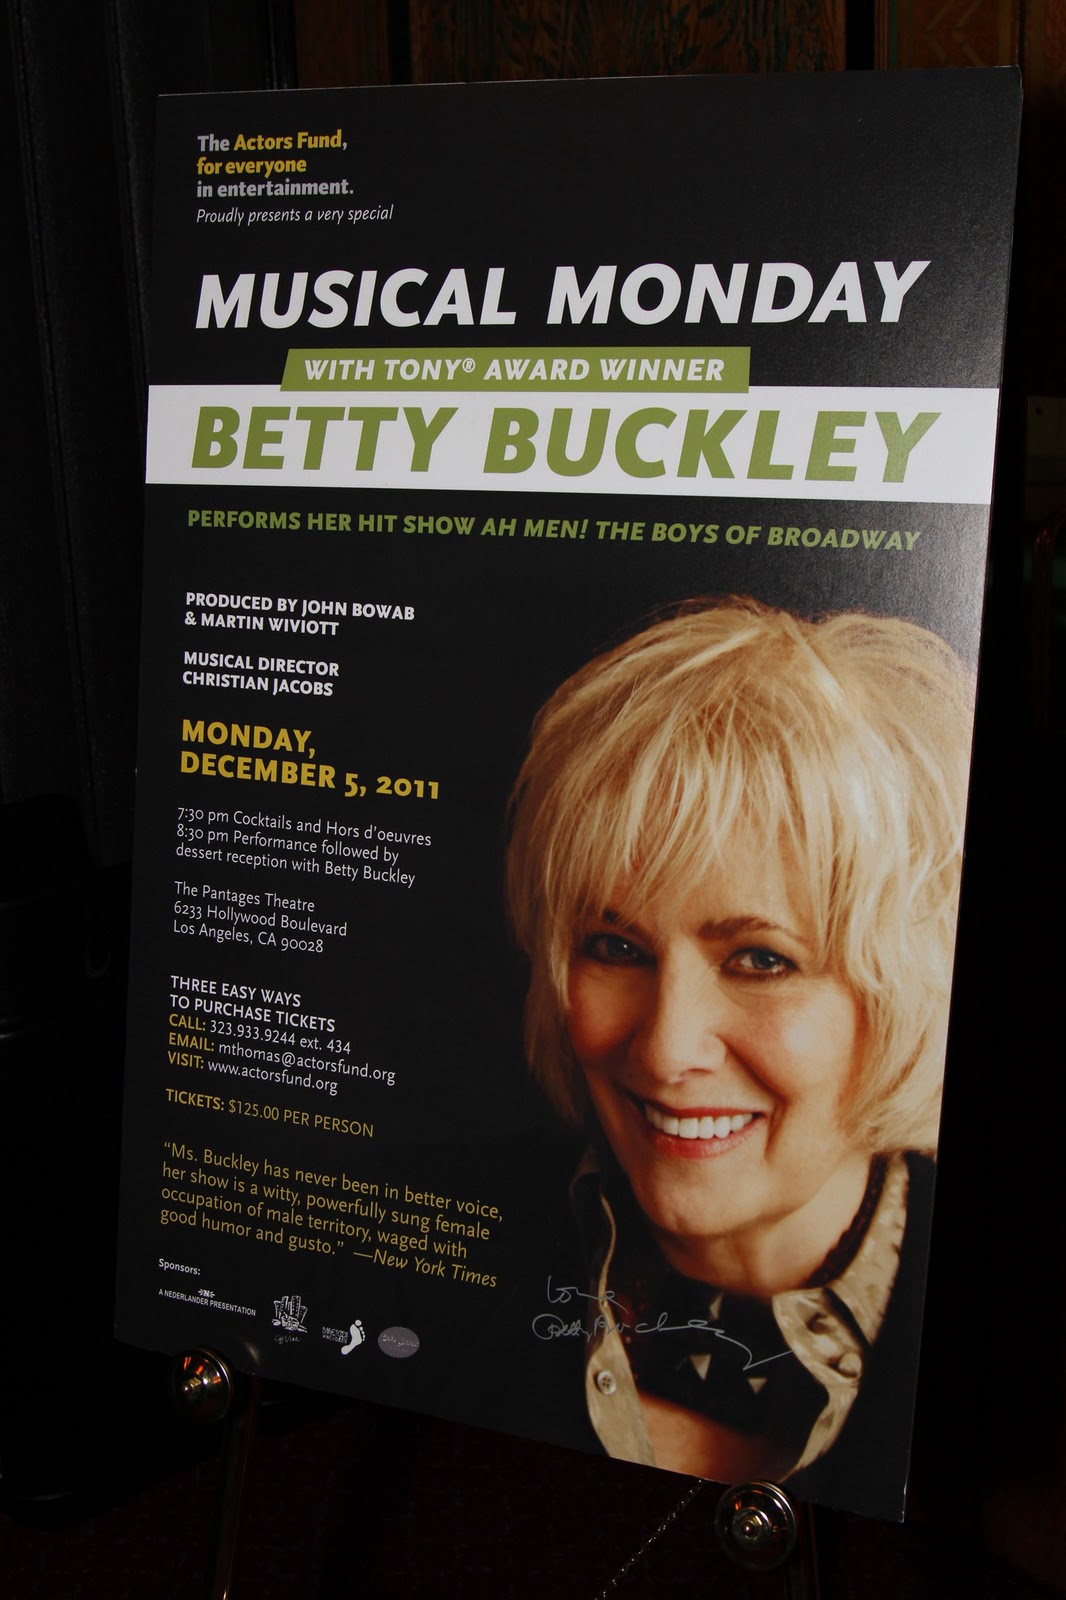 Revisiting Betty Buckley! pic